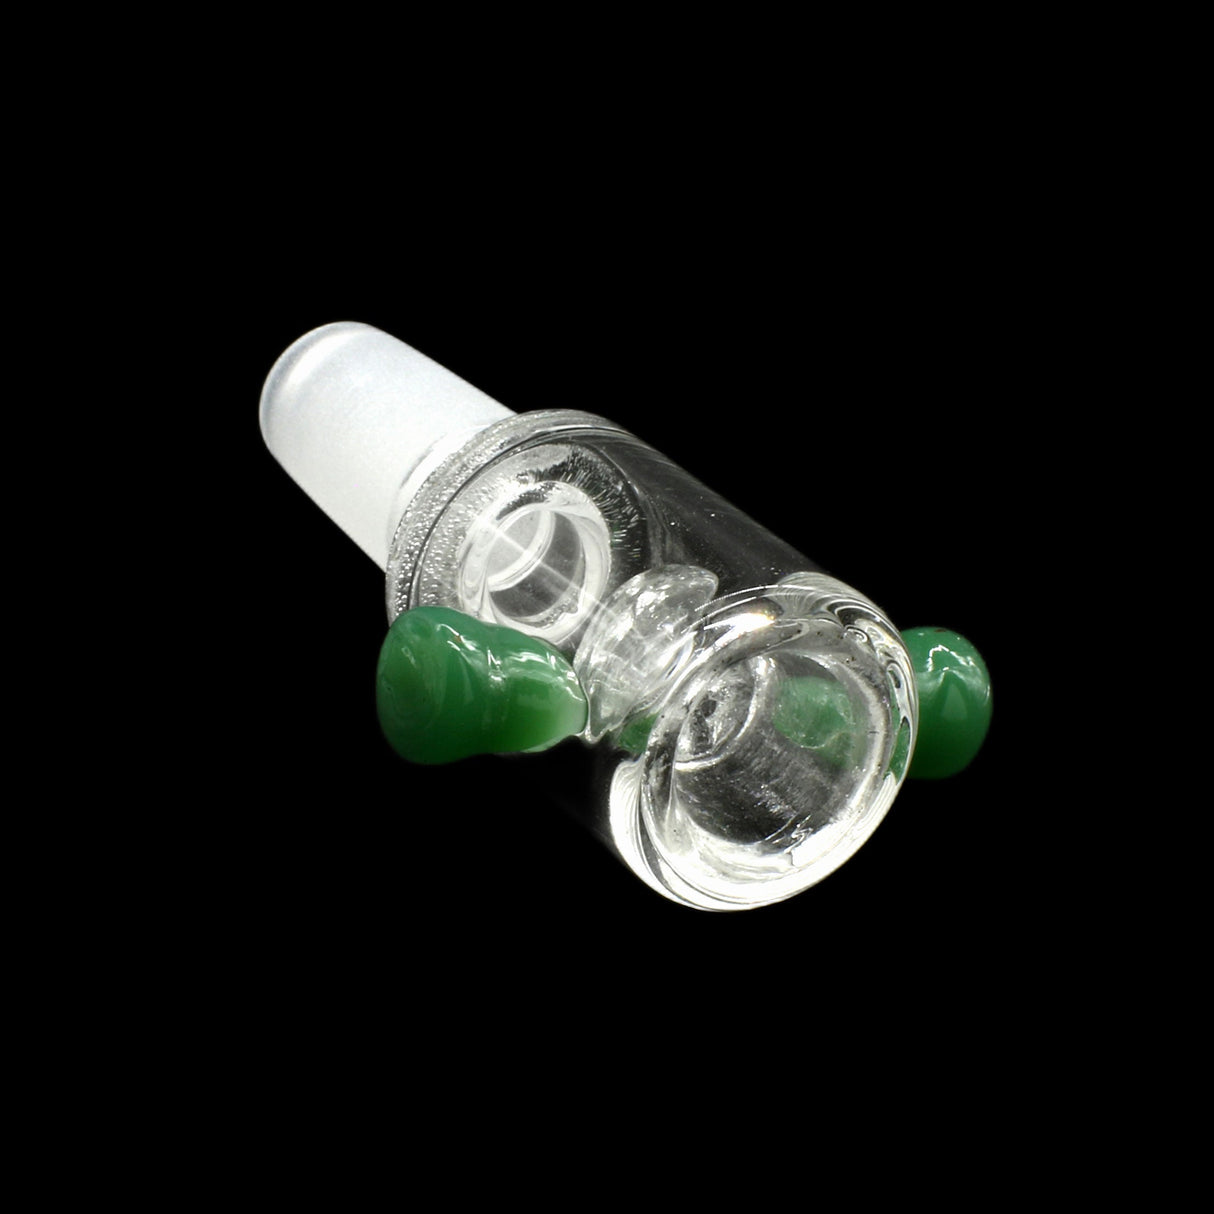 Rupert's Drop borosilicate glass bong bowl with honeycomb design and side handles, angled view